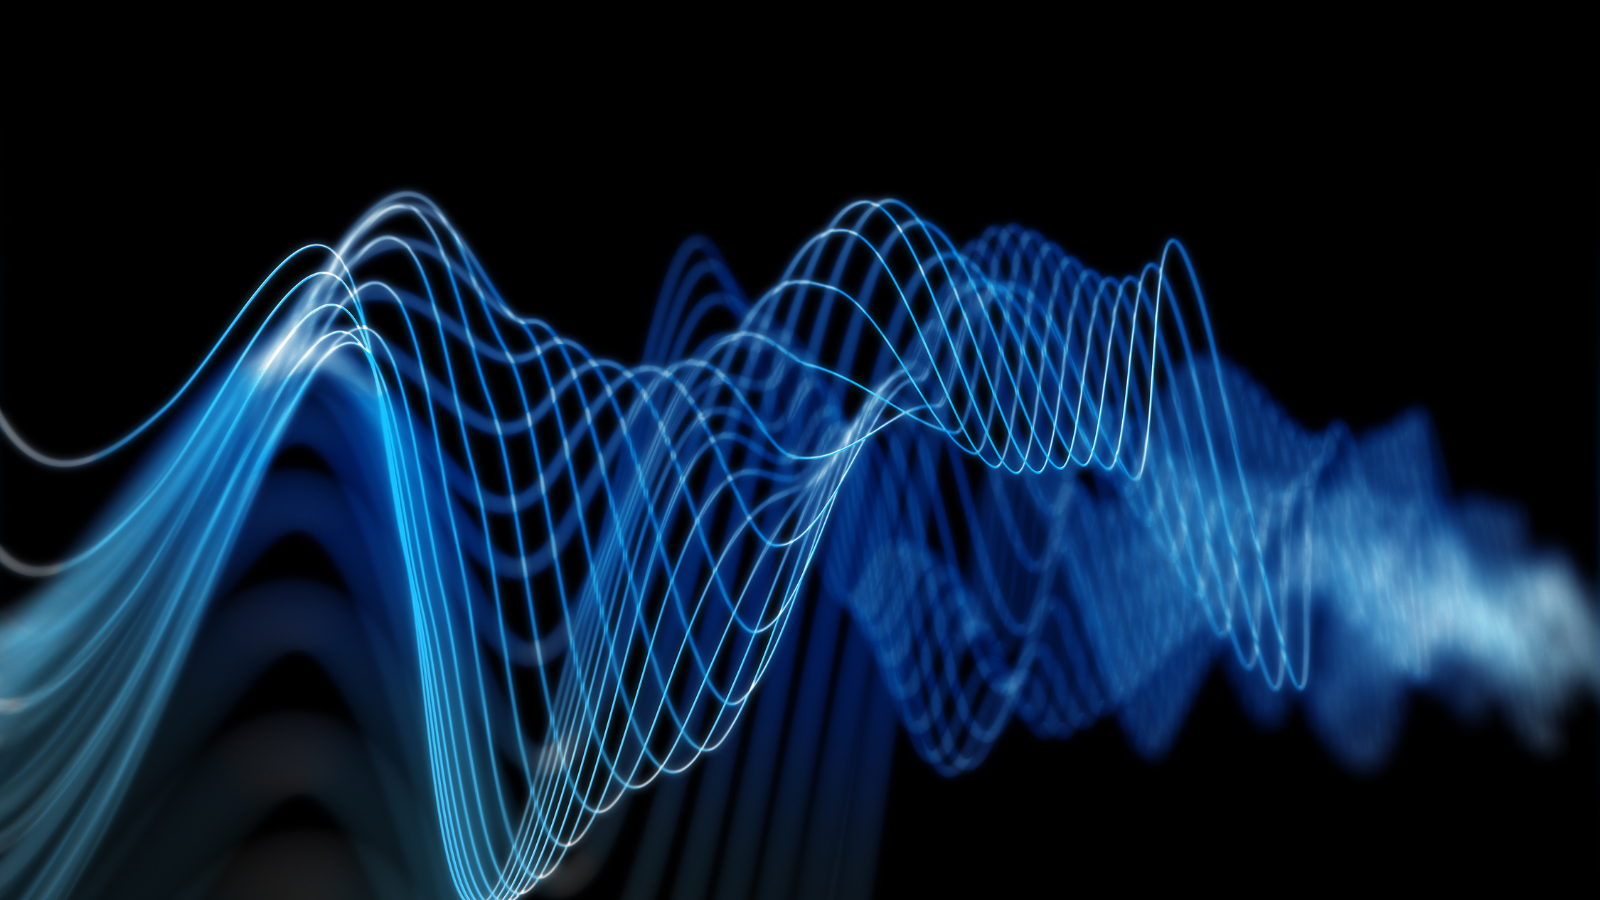 Abstract digital image of intertwining blue and white waveforms set against a black background. The waveforms create a dynamic, flowing pattern, resembling sound waves or energy signals. - CSA Catapult